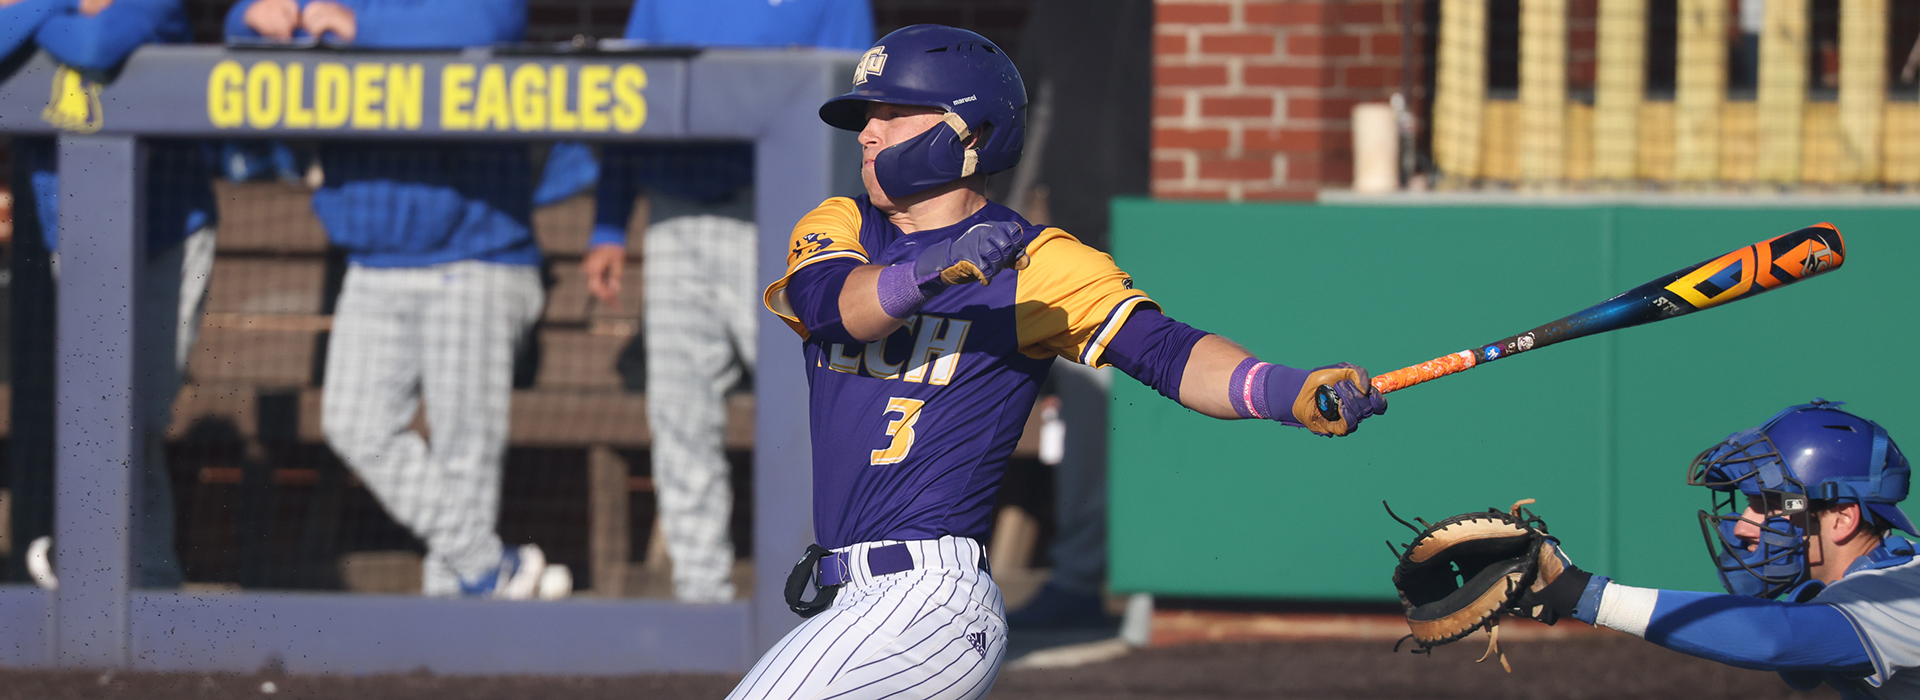 Golden Eagles rally to down in-state rival Blue Raiders, 11-9